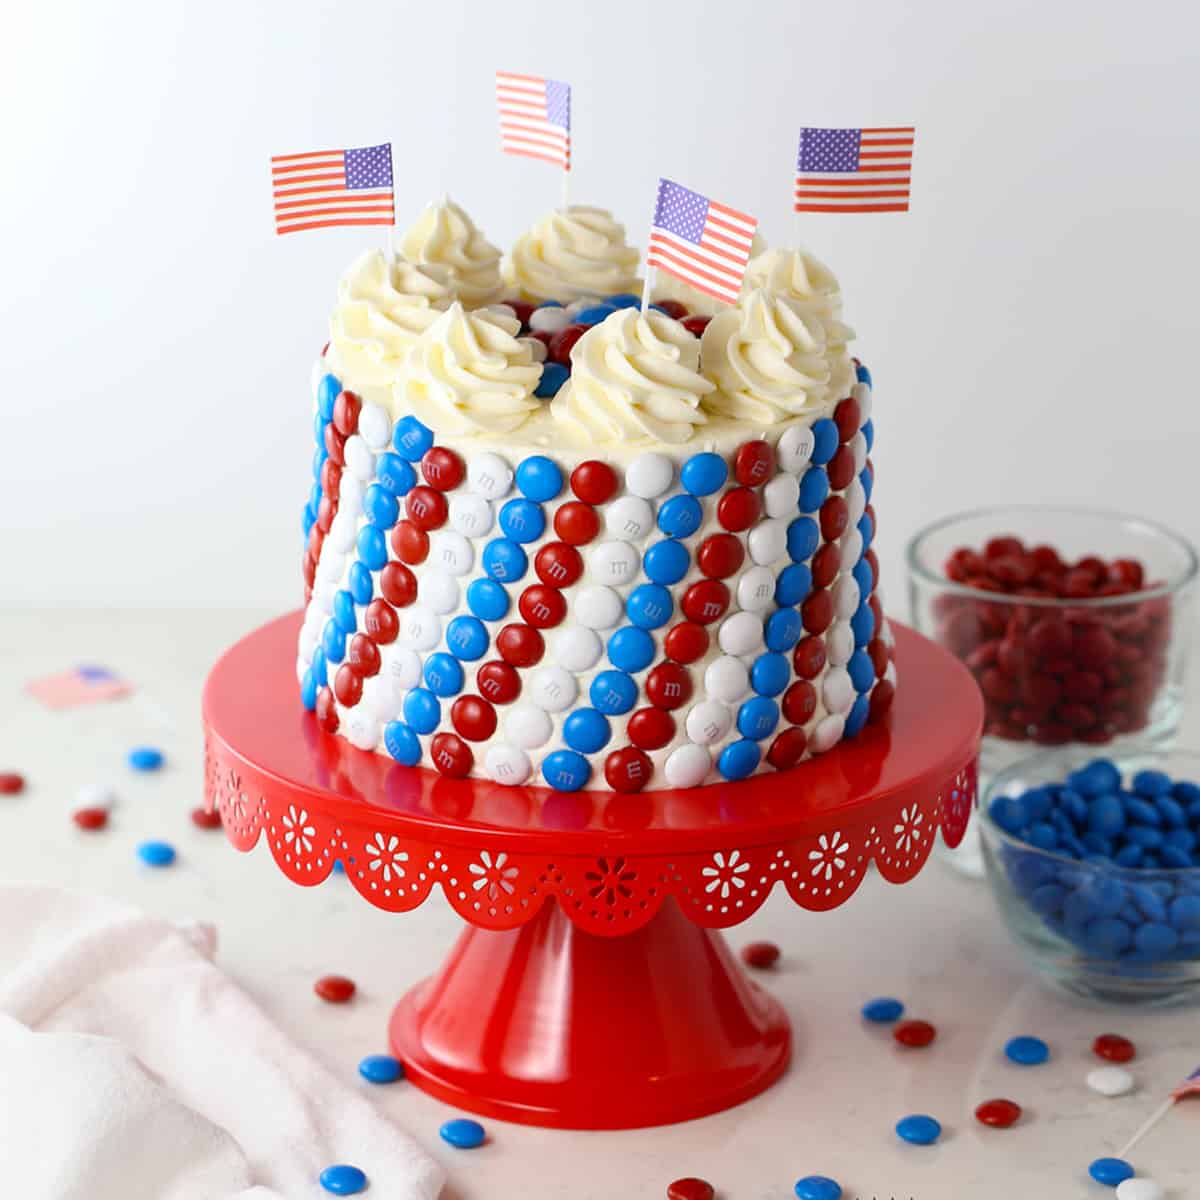 The most adorable cake with red, white and blue m and m's on the side.